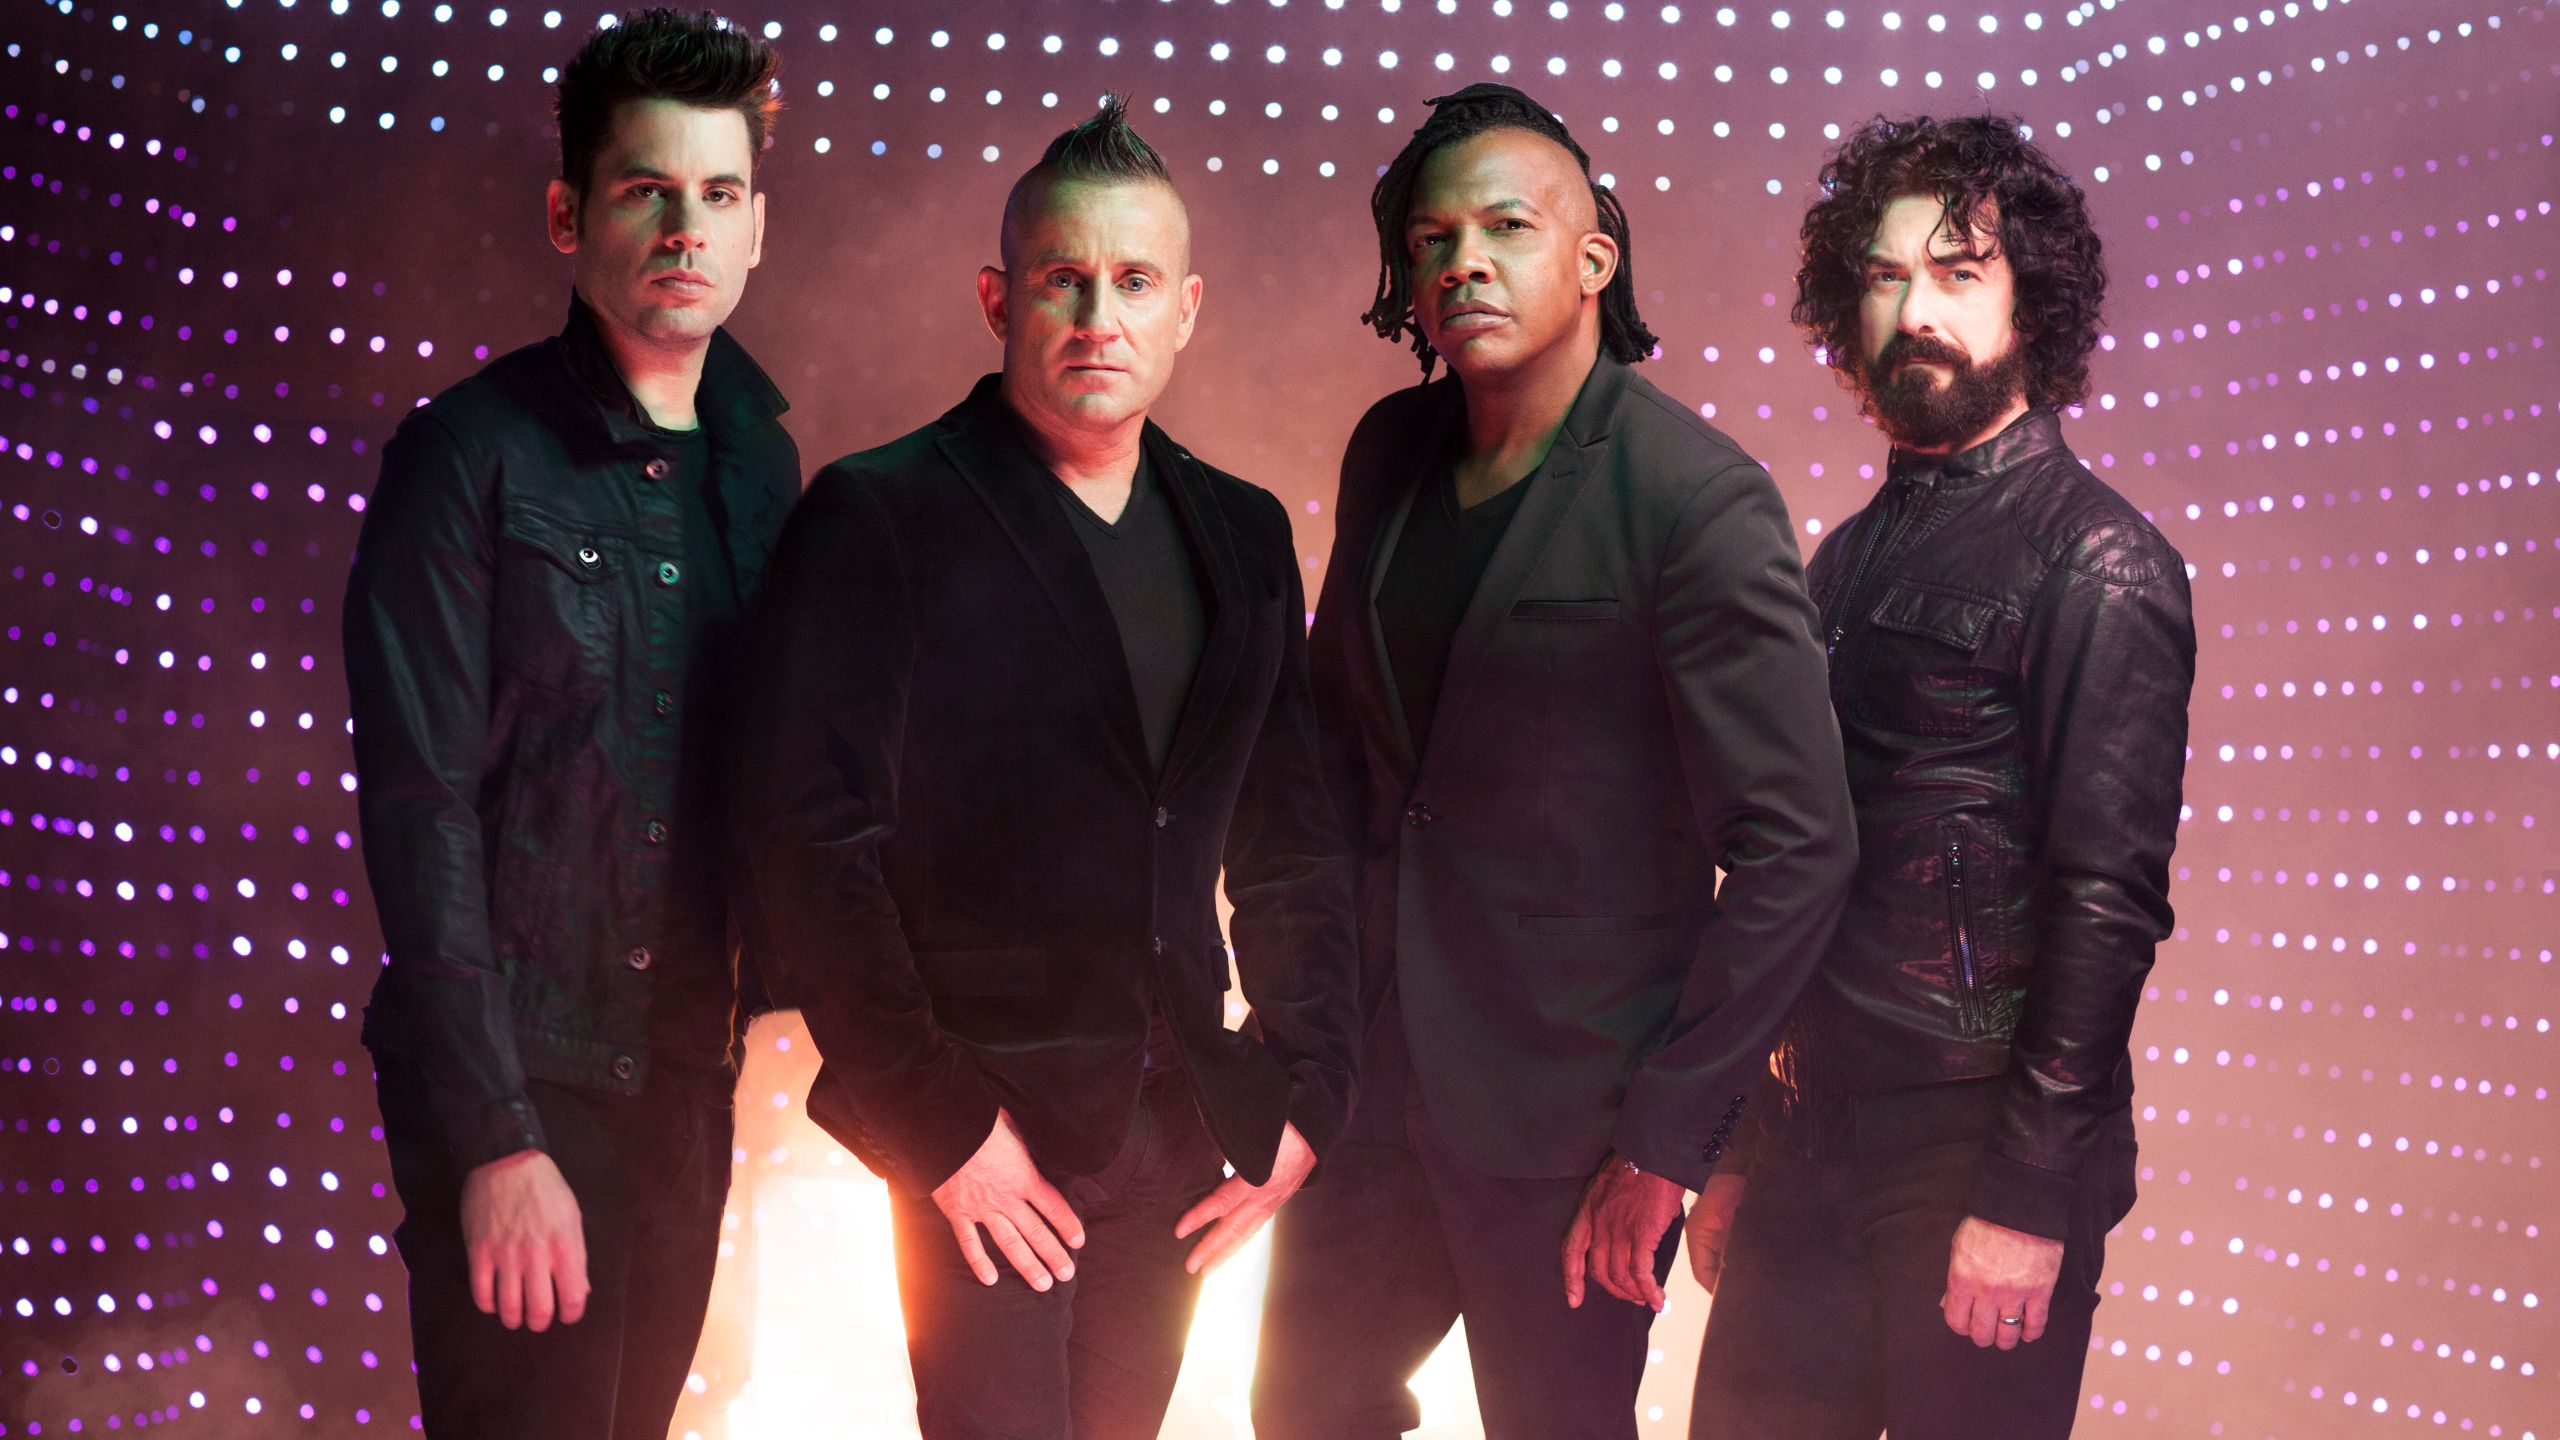 Christian pop rock band Newsboys to perform at Freedom Hall on April 30